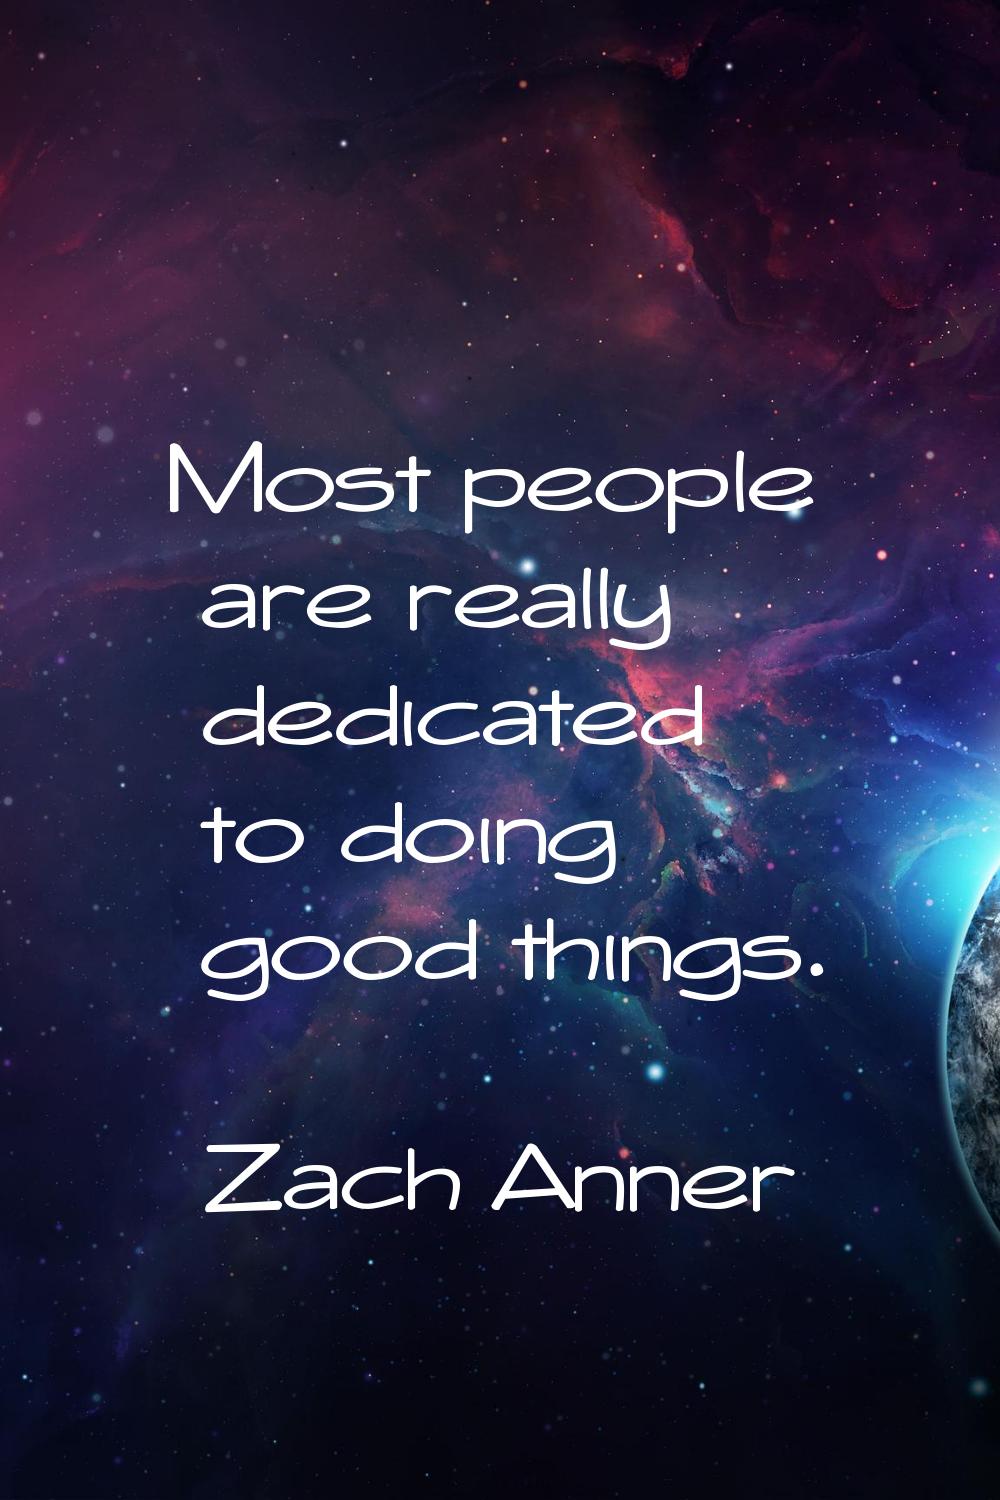 Most people are really dedicated to doing good things.